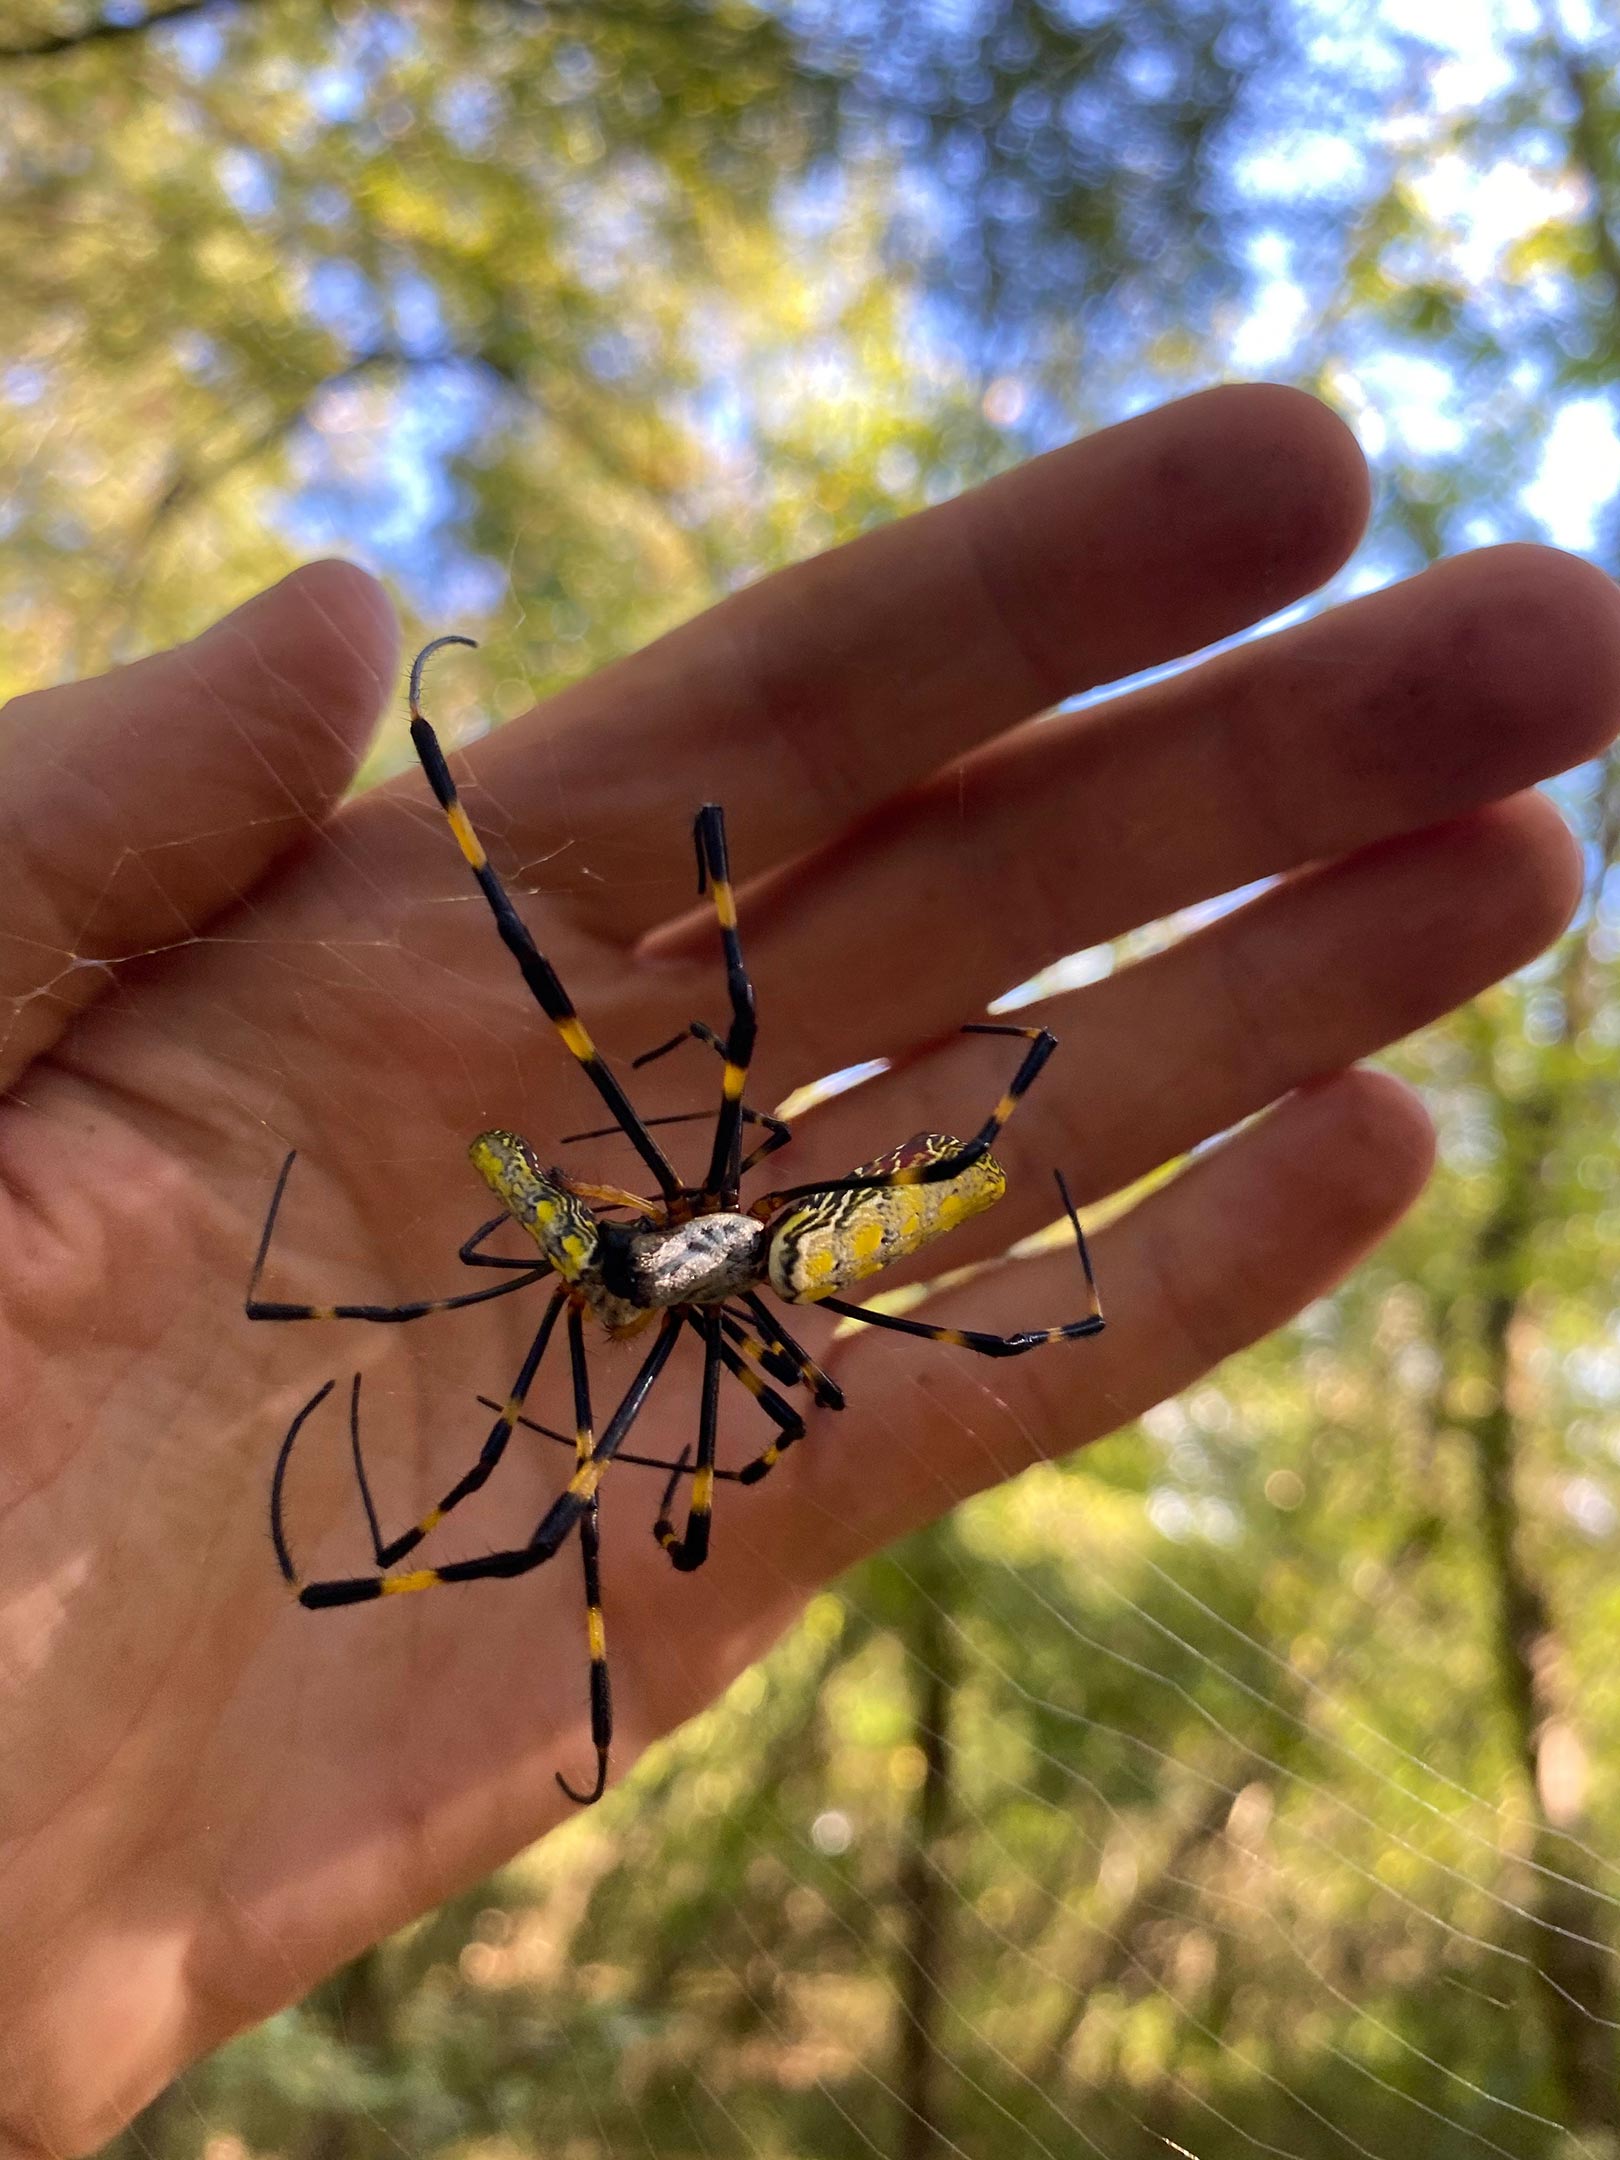 Large Asian Joro spiders are starting to populate across SC, other